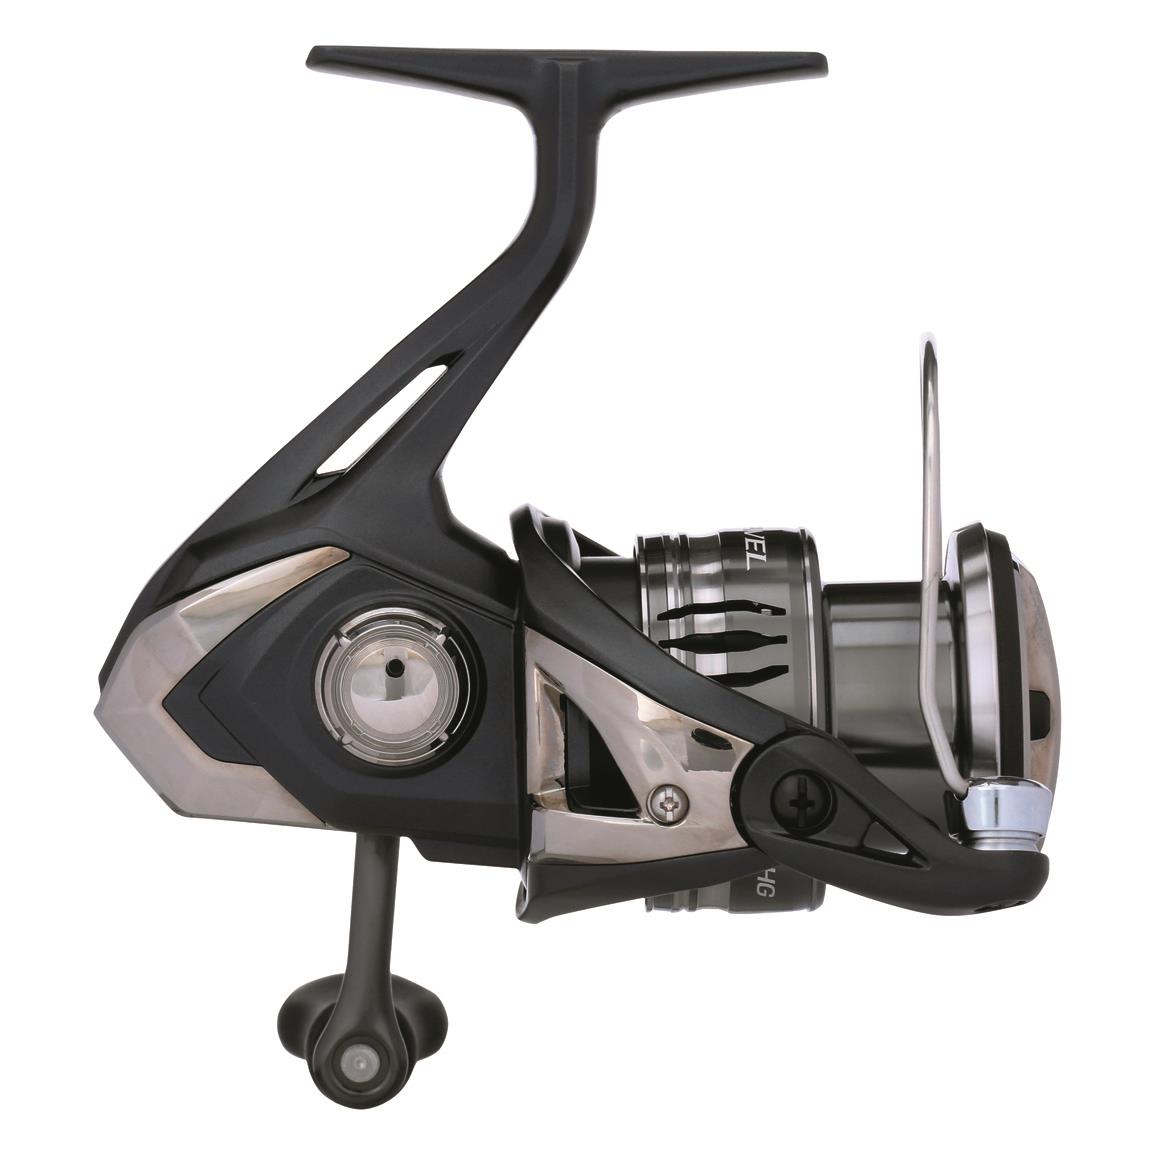 Pflueger Supreme Spinning Reel, Size 25, 5.2:1 Gear Ratio - 726933, Spinning  Reels at Sportsman's Guide